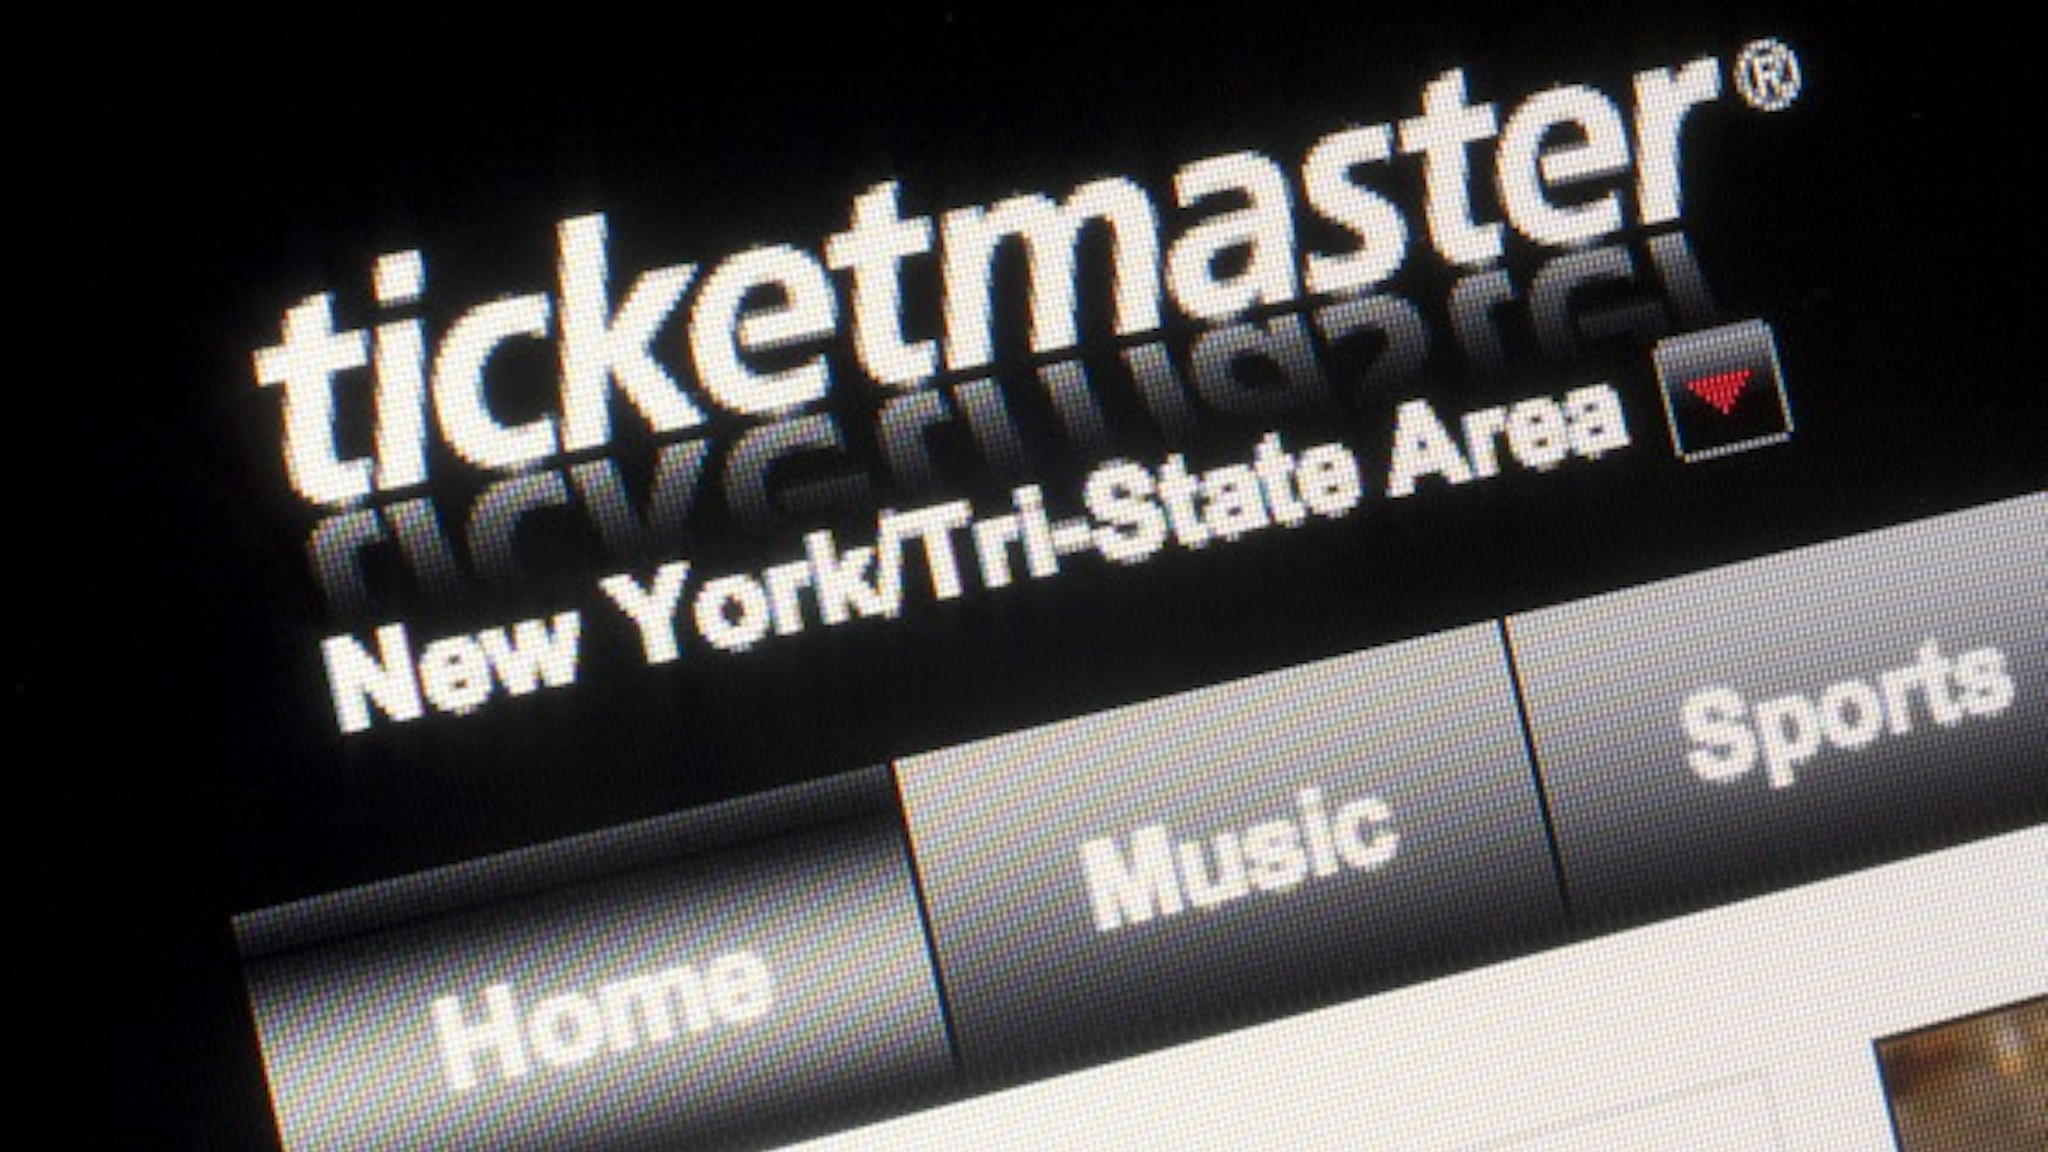 The Ticketmaster Entertainment LLC website is displayed for a photograph in New York, U.S., on Wednesday, Aug. 31, 2011.